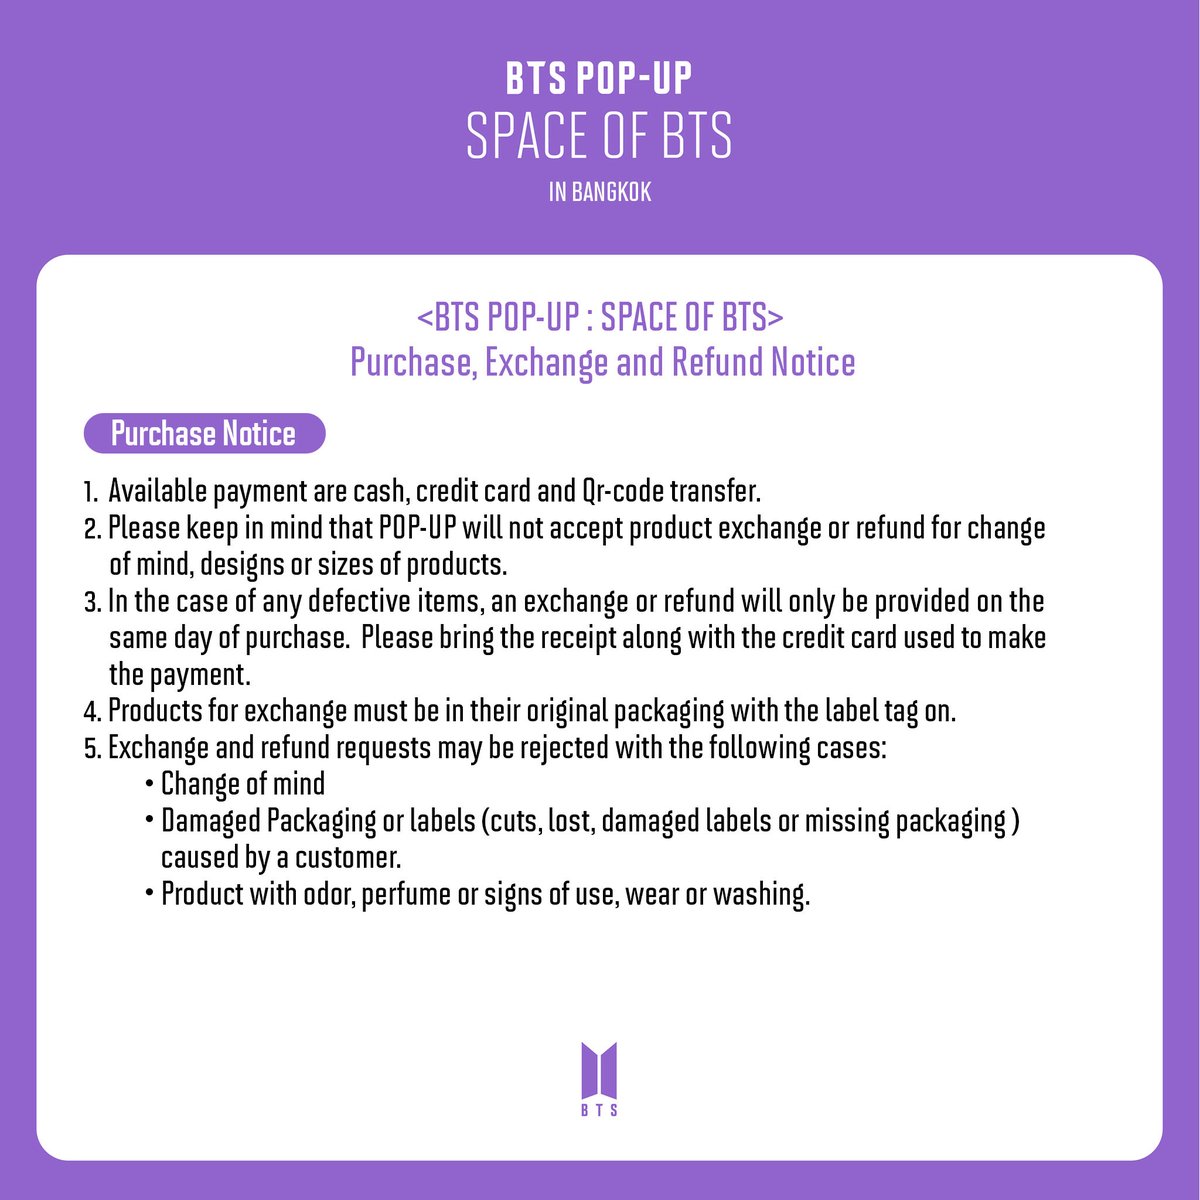 [BTS POP-UP : SPACE OF BTS in Bangkok] We’re excited to see you all! 💜 Please check out the operation & safety guideline and other notices for BTS POP-UP : SPACE OF BTS in Bangkok. 📆 20 Jan - 31 Mar 2022 📍 1st Floor, Siam Center #BTS #BTS_POPUP   #SPACE_OF_BTS